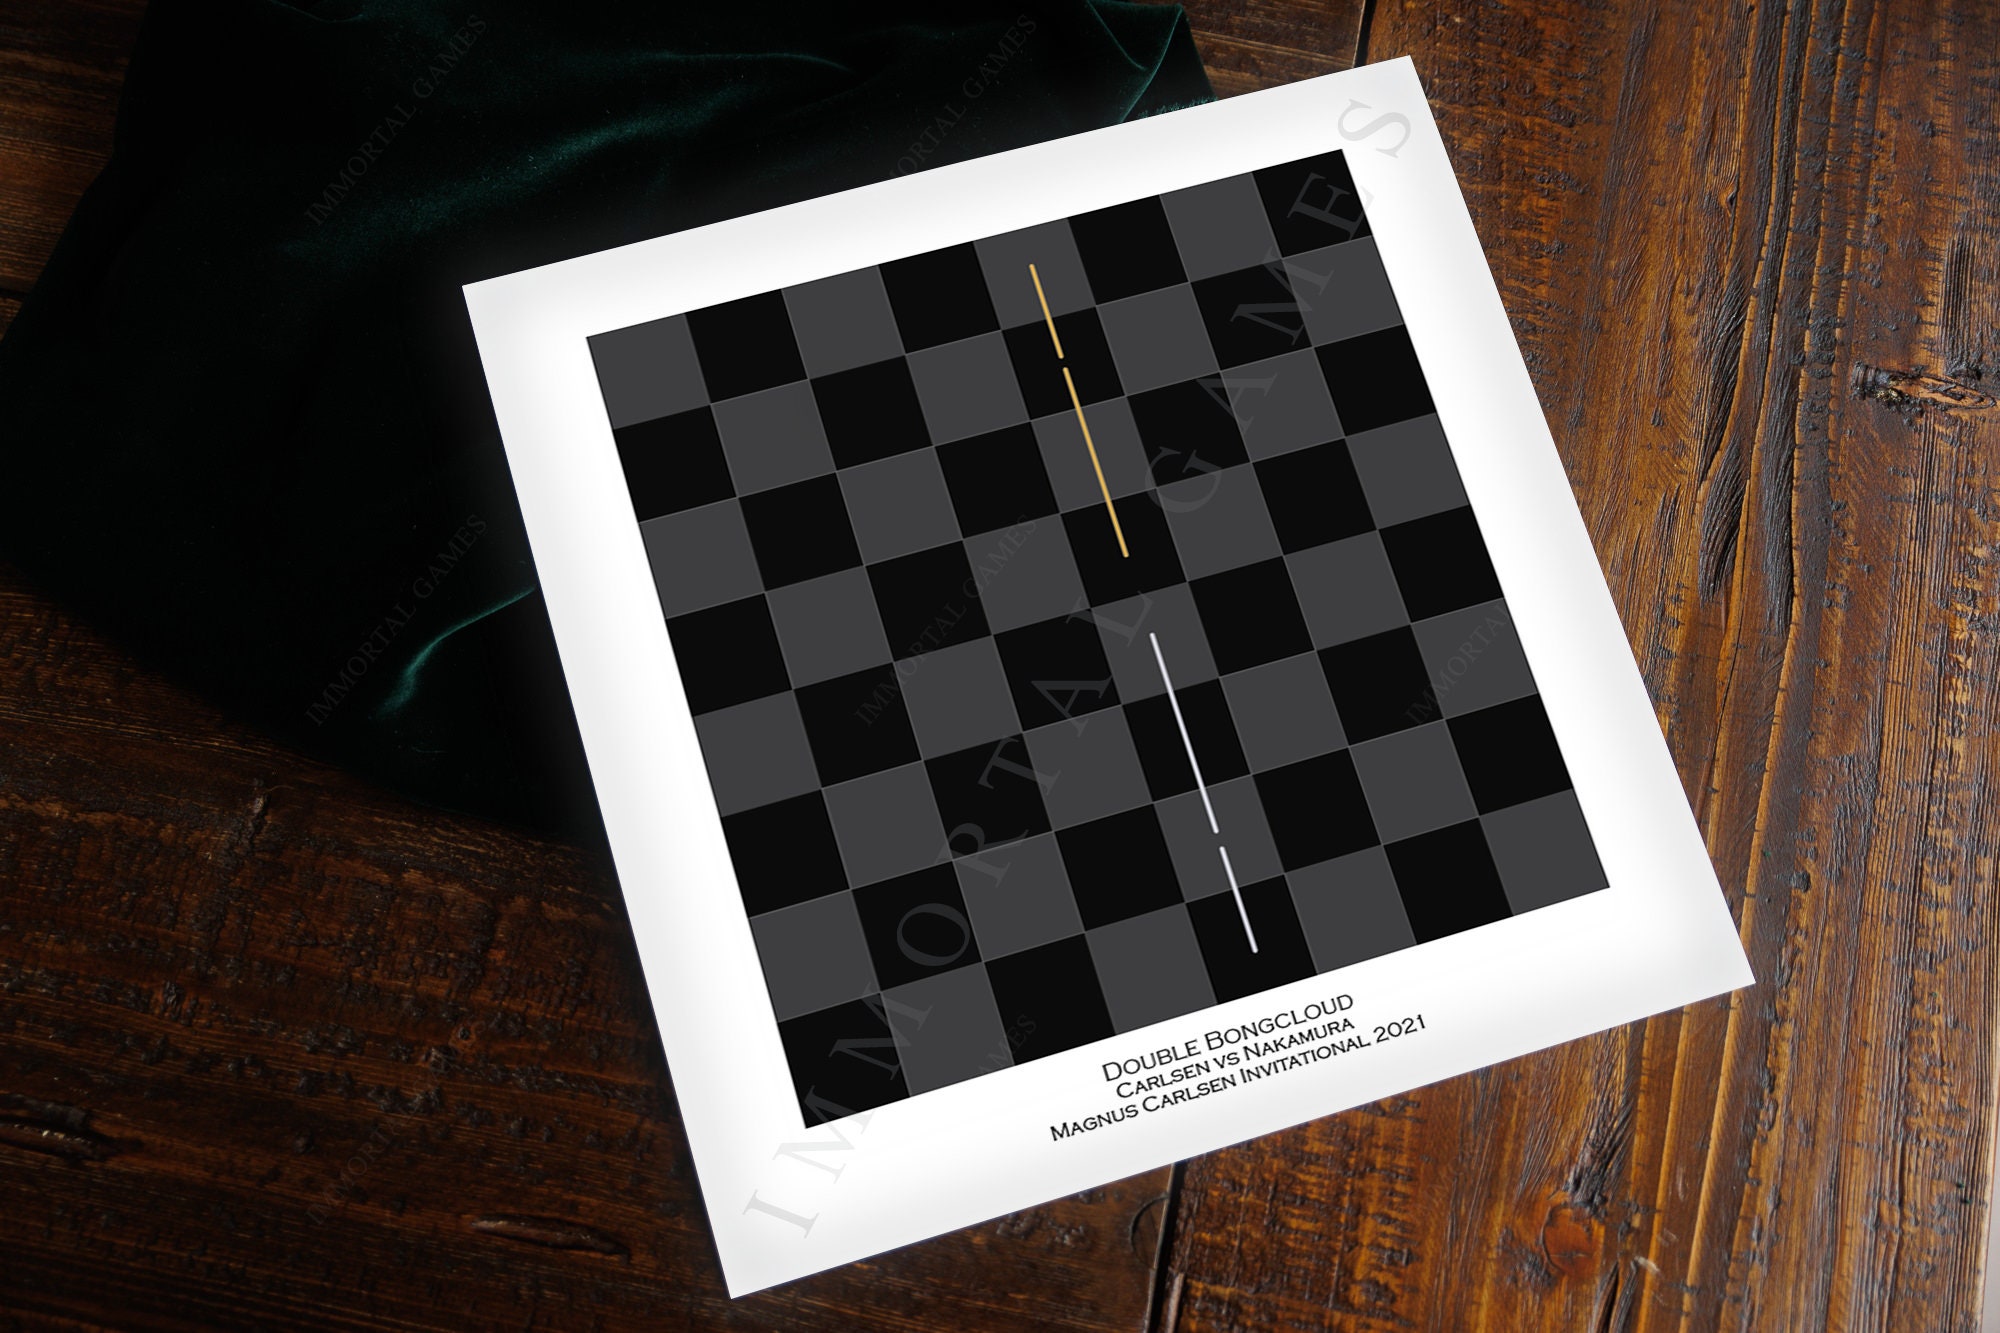 Immortal Games - Chess Lessons 